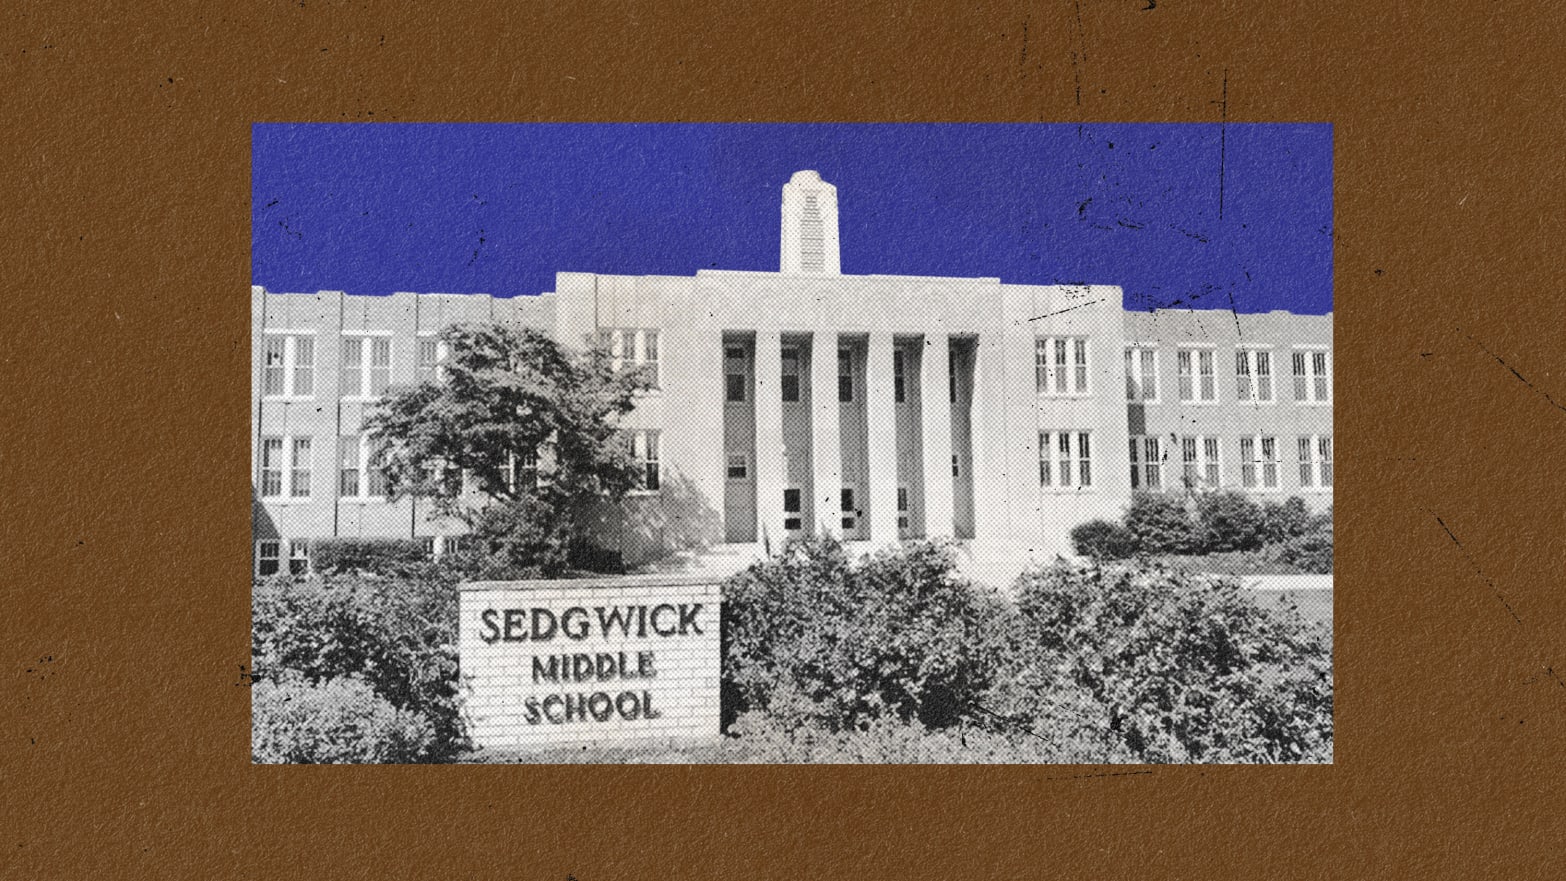 Sedgwick Middle School in Connecticut